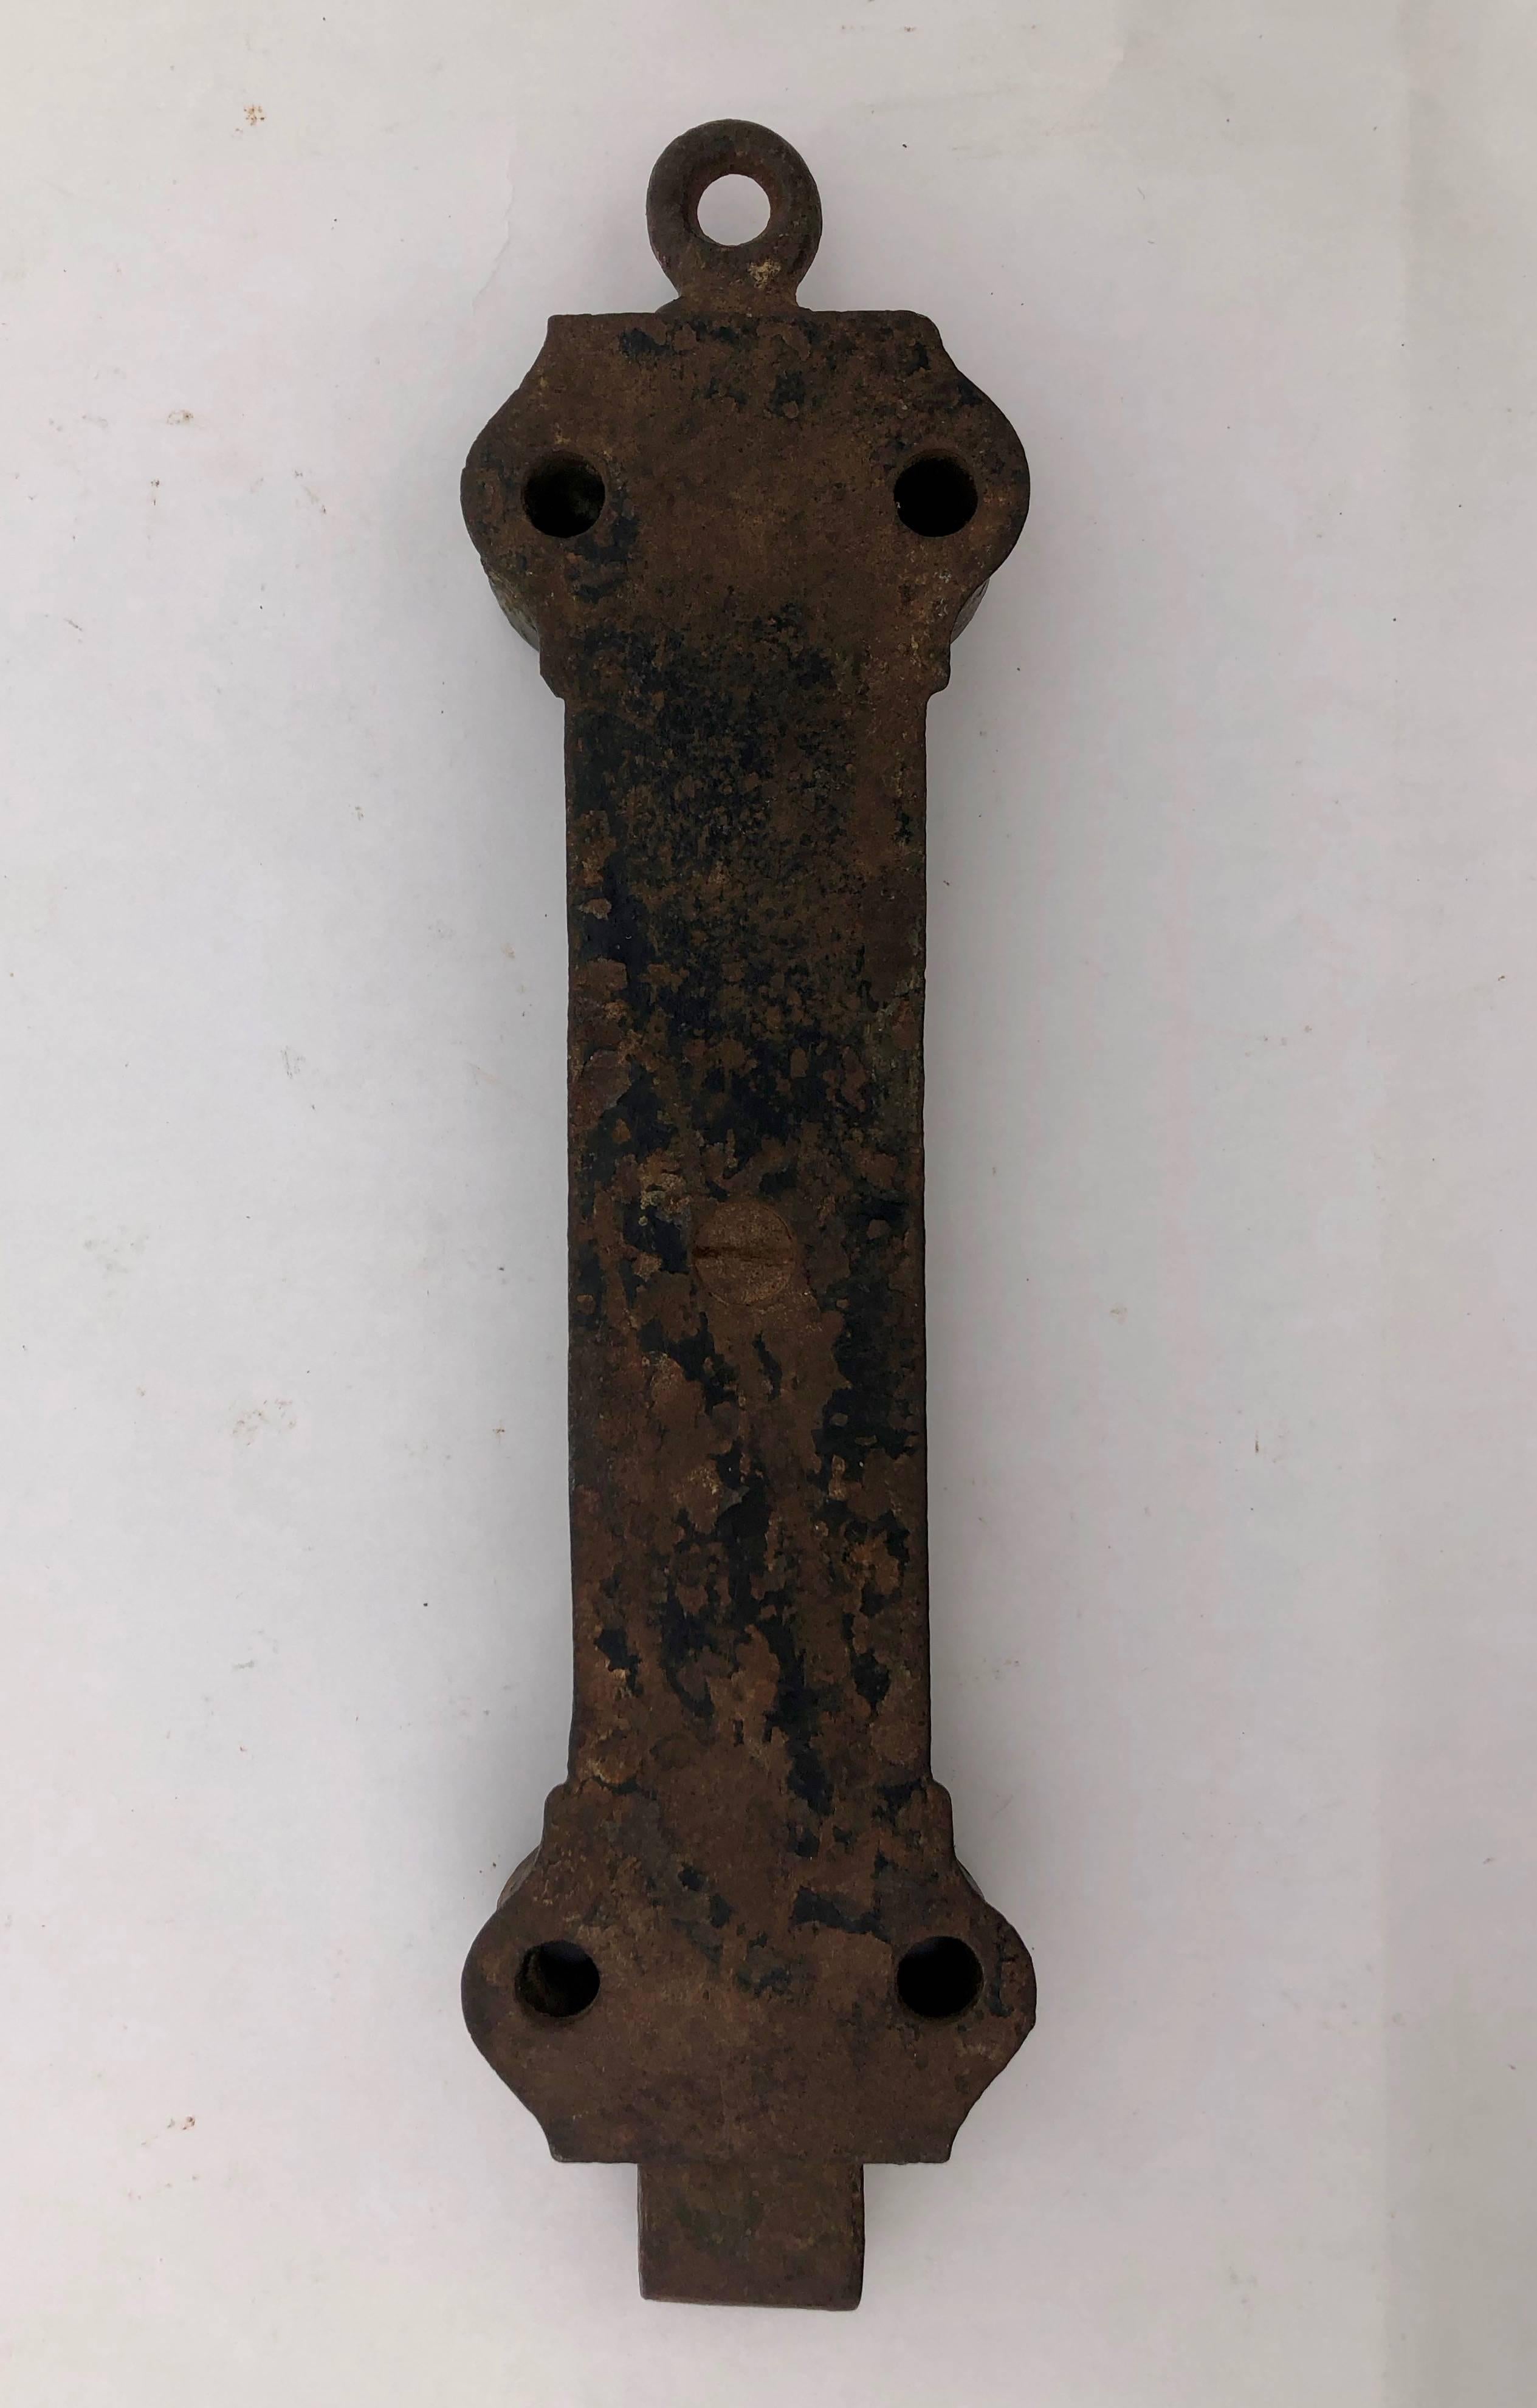 This is an early 1900s French cast iron door top (or bottom) lock. It has a great patina and a great decorative detailed design.